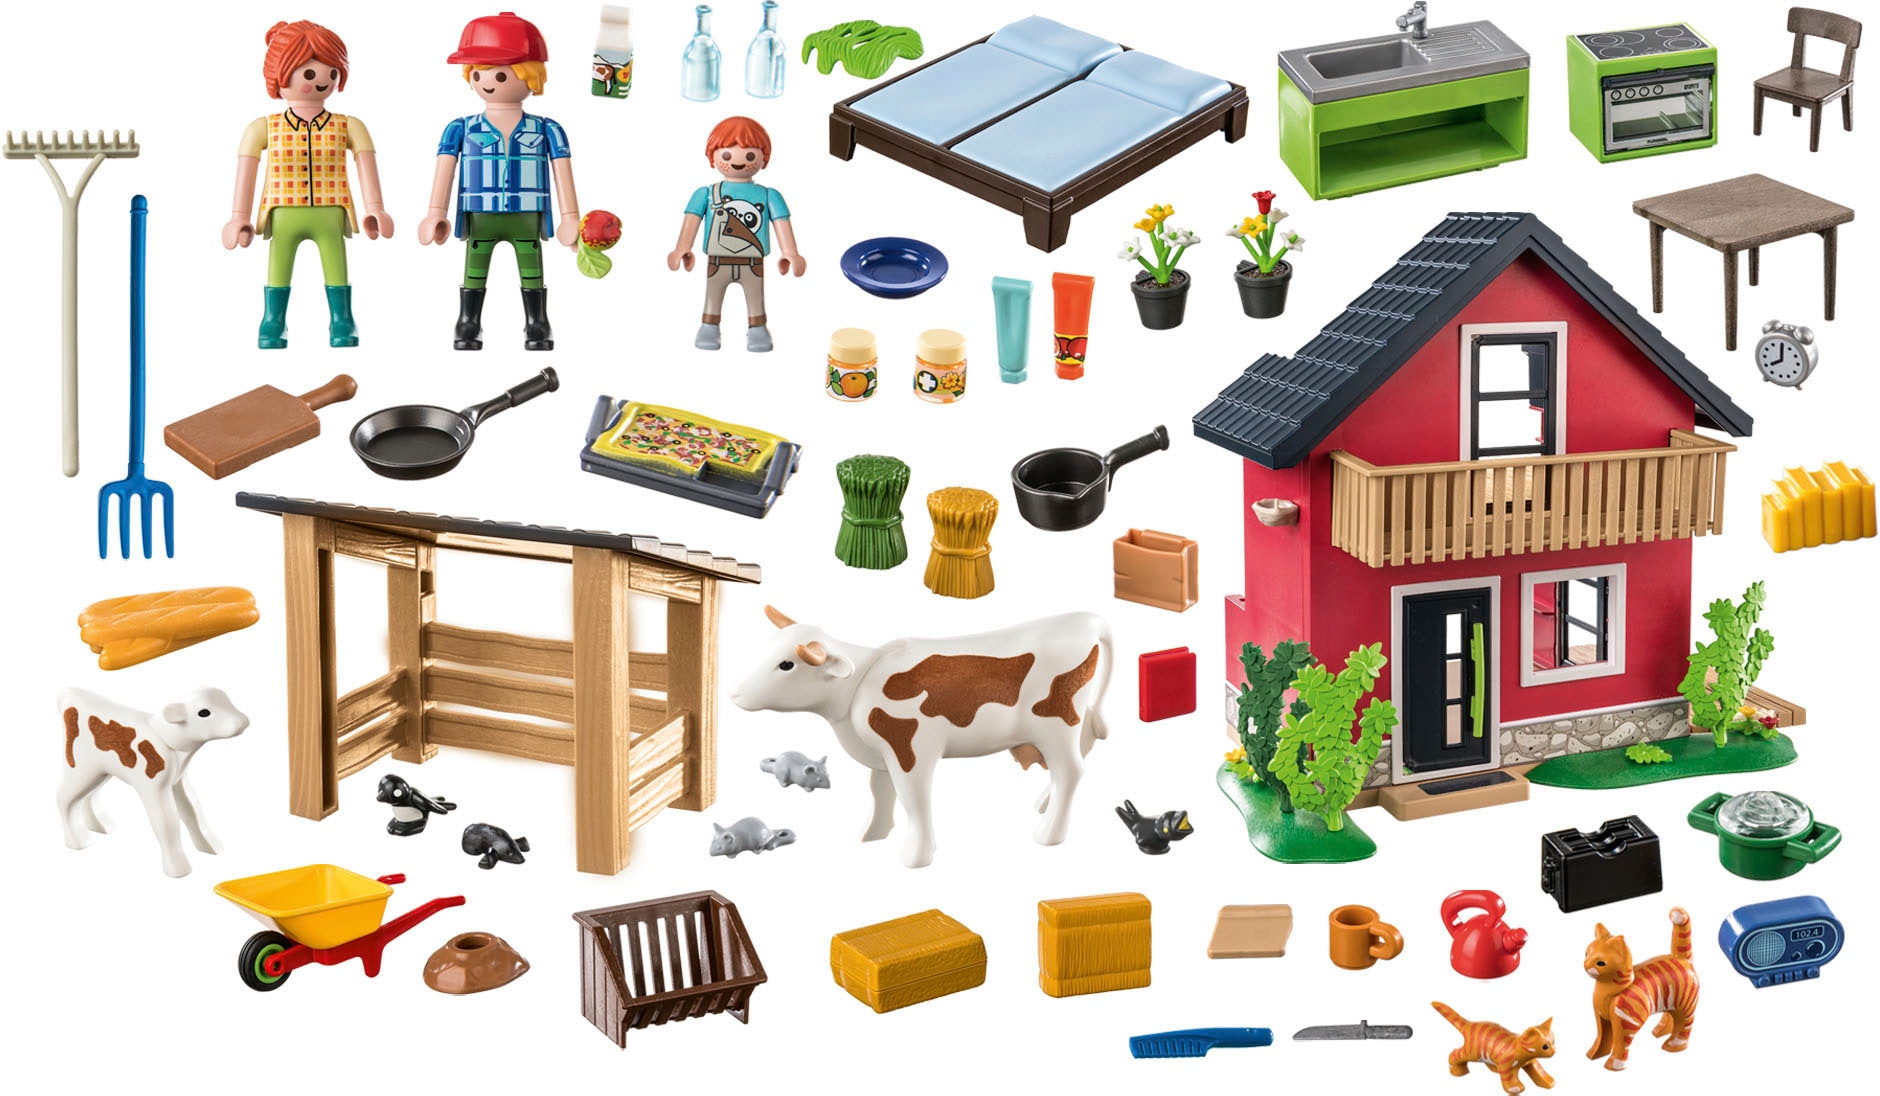 Playmobil® Konstruktions-Spielset »Bauernhaus (71248), Country«, teilweise aus recyceltem Material; Made in Germany